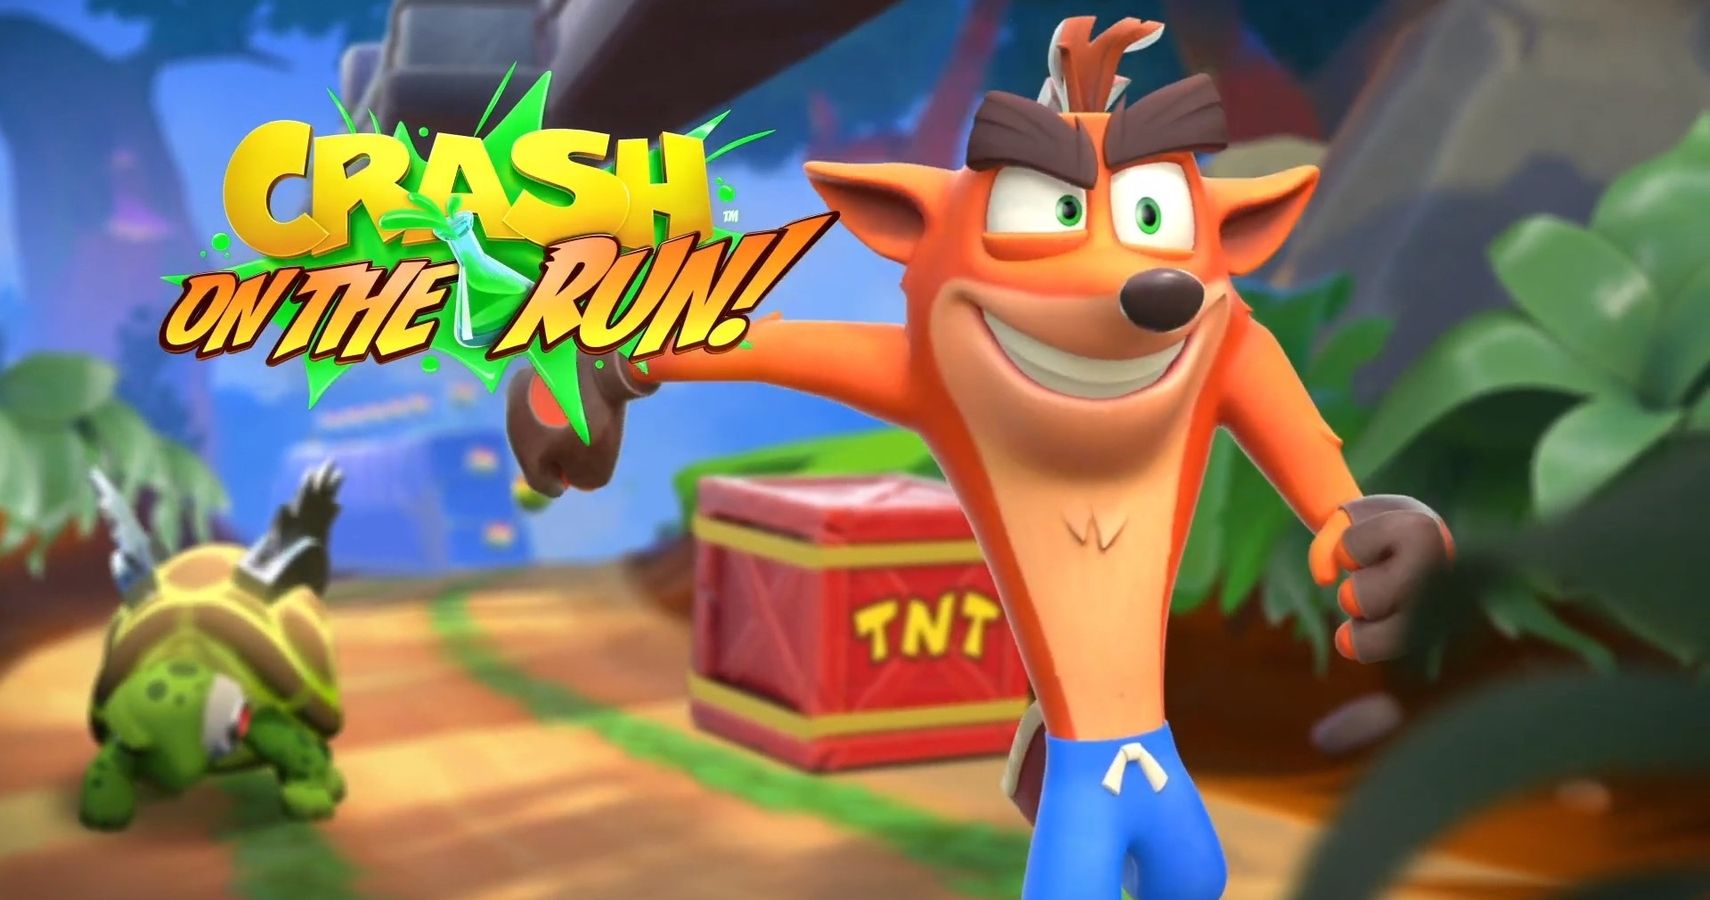 Crash Bandicoot: On The Run Is Headed To Everyone's Phone as Crash enters mobile gaming on March 25 for both Android and iOS